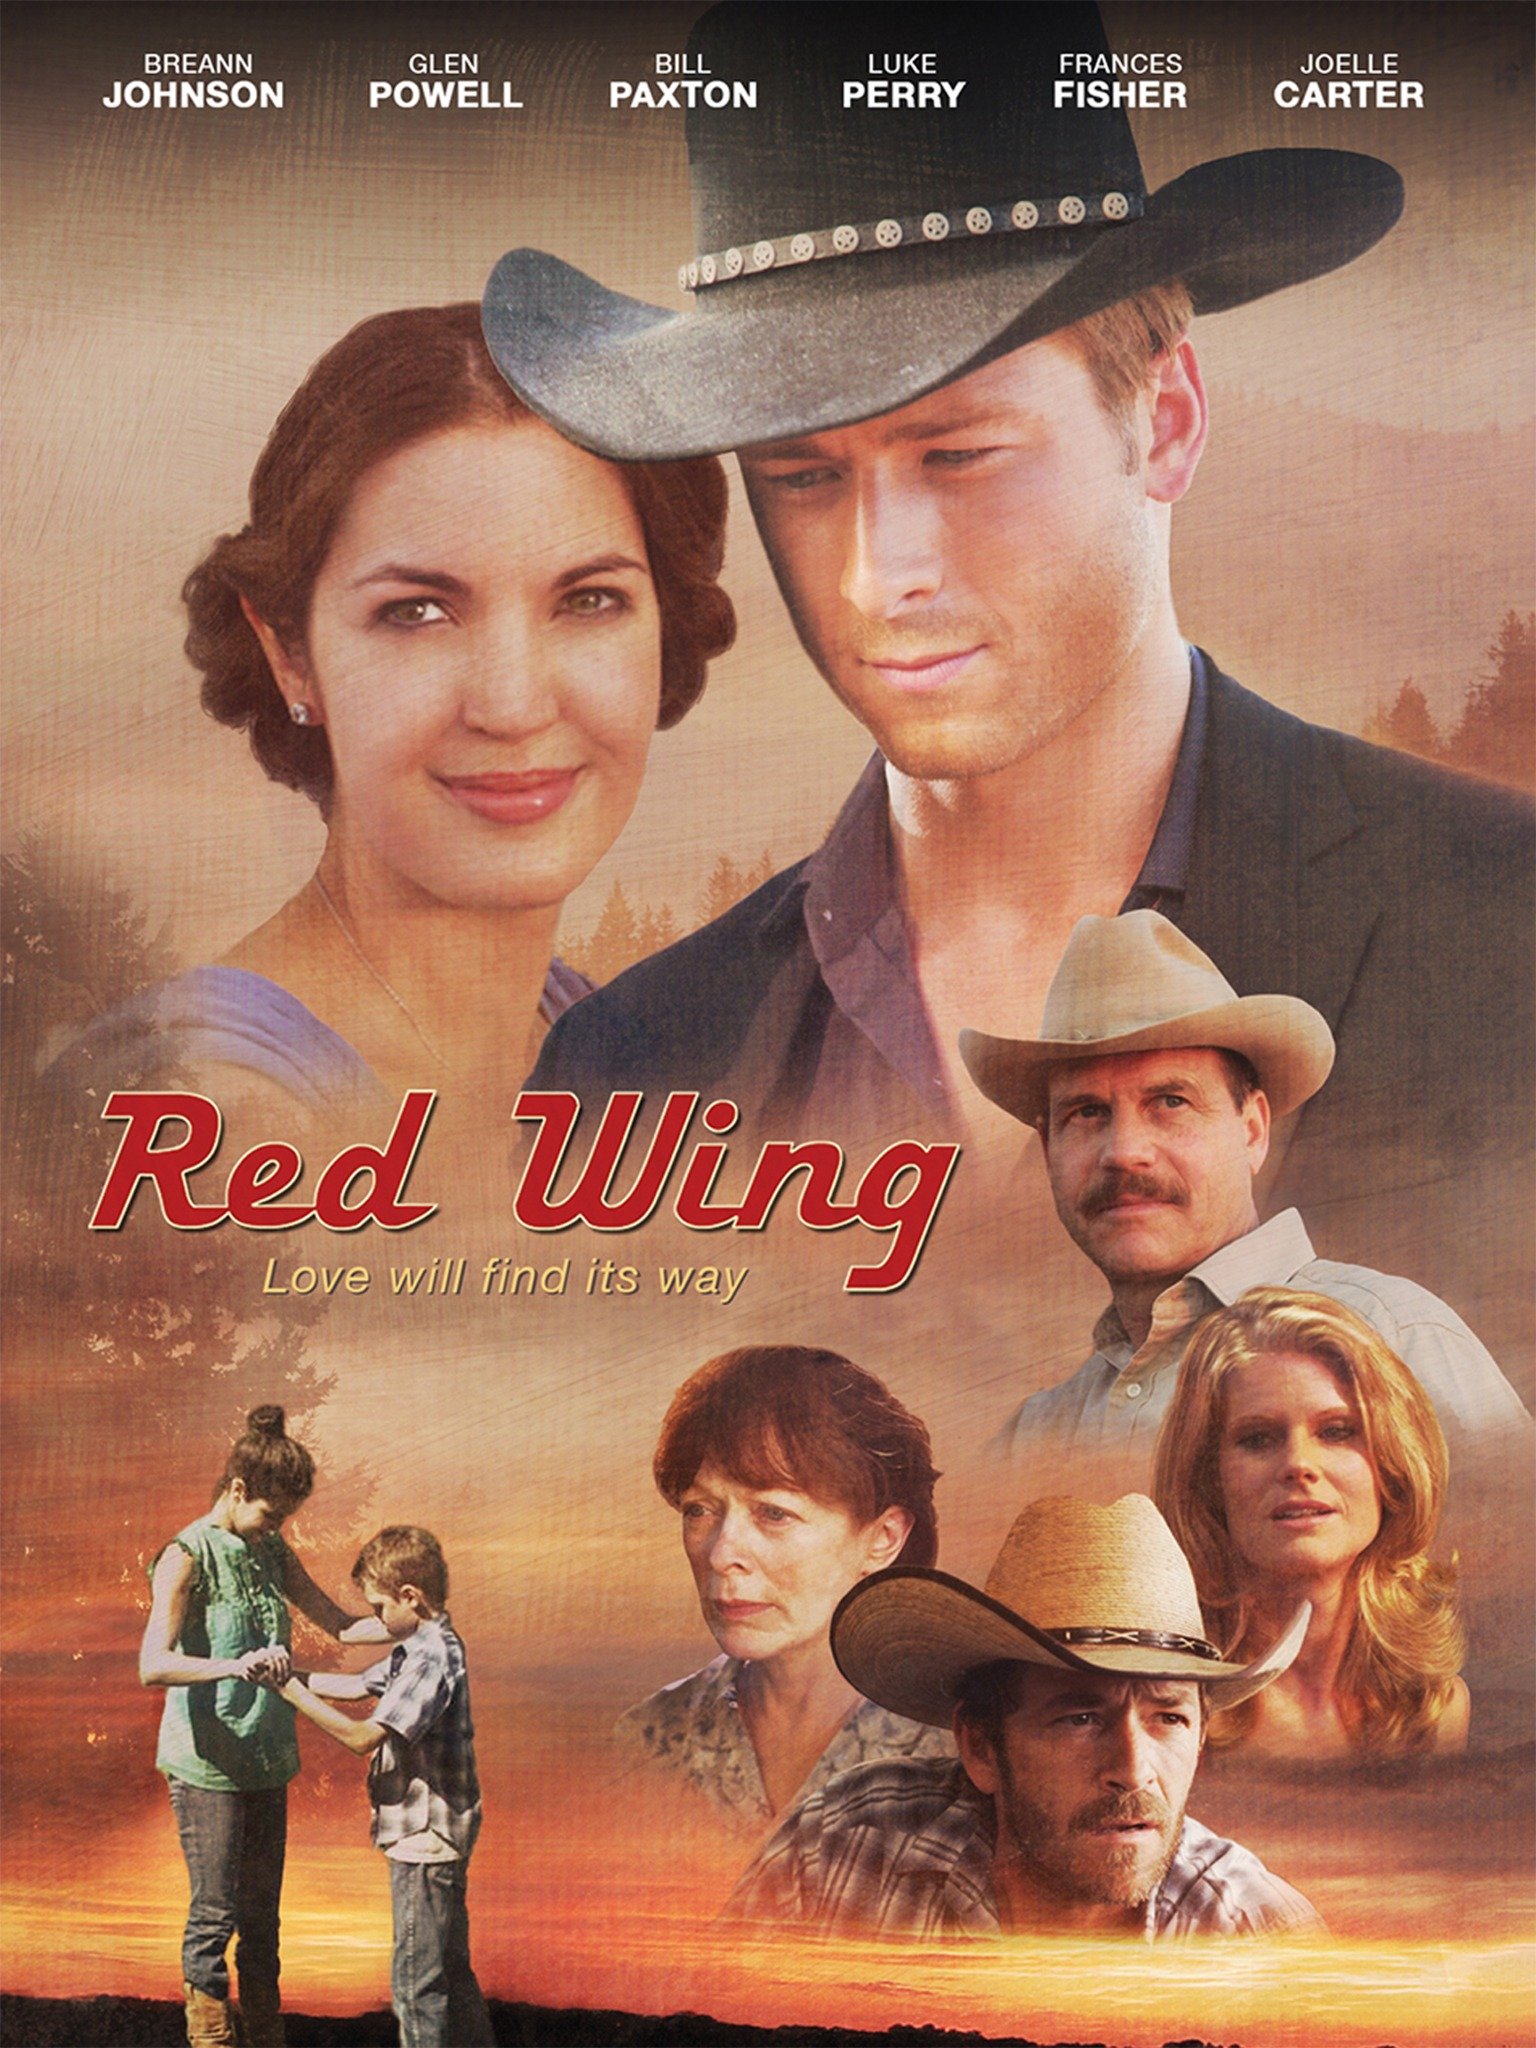 Red Wing - Movie Reviews